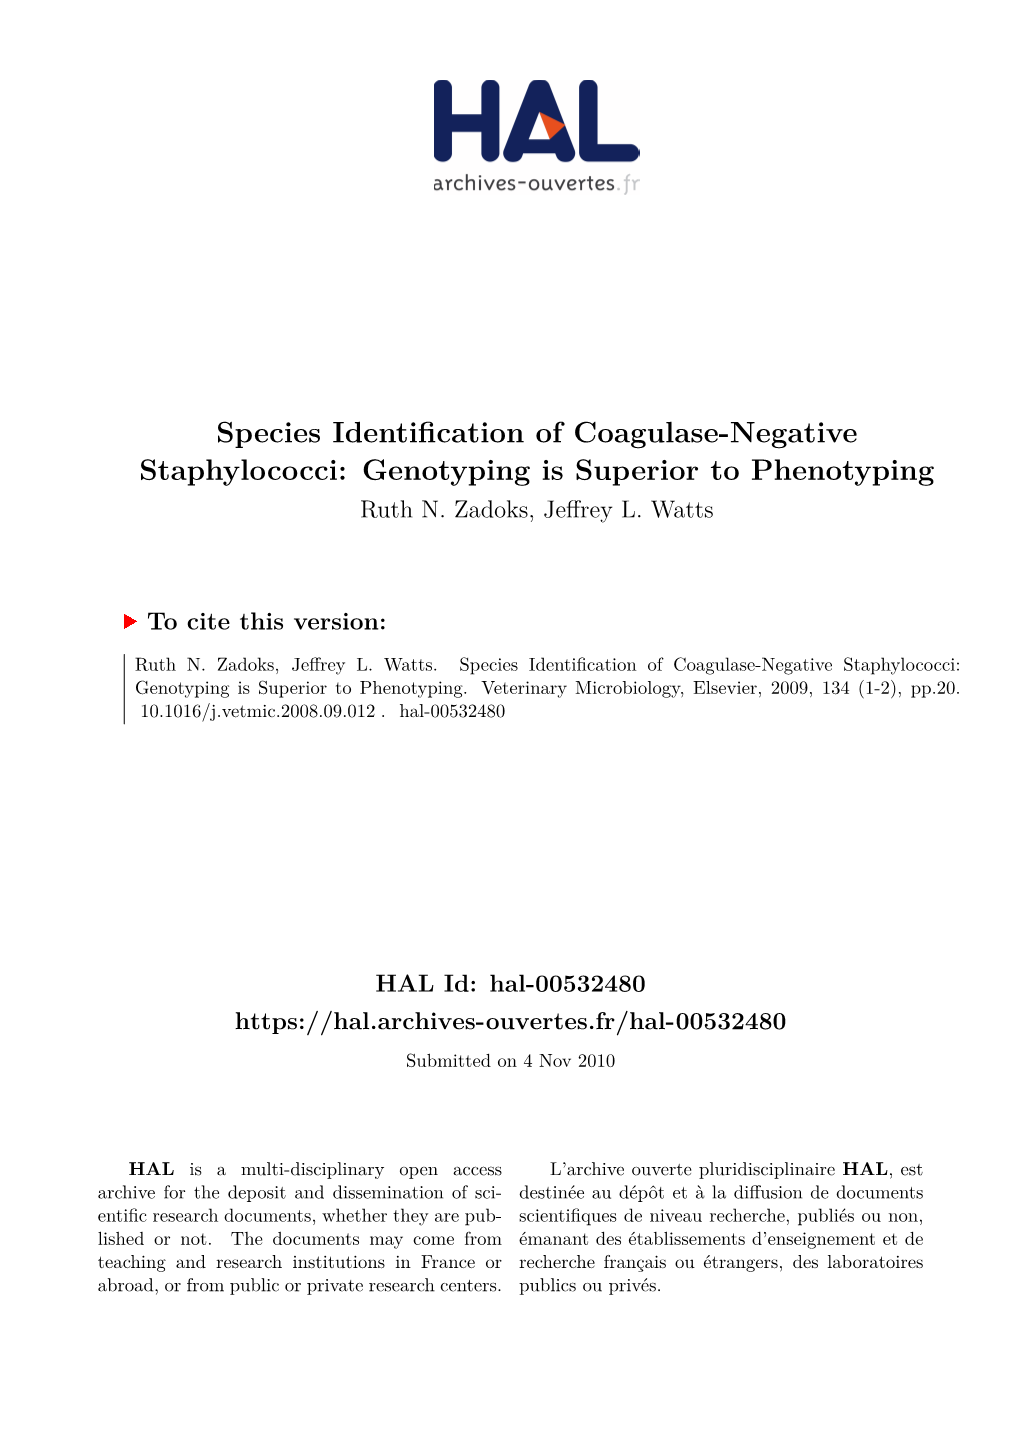 Species Identification of Coagulase-Negative Staphylococci: Genotyping Is Superior to Phenotyping Ruth N